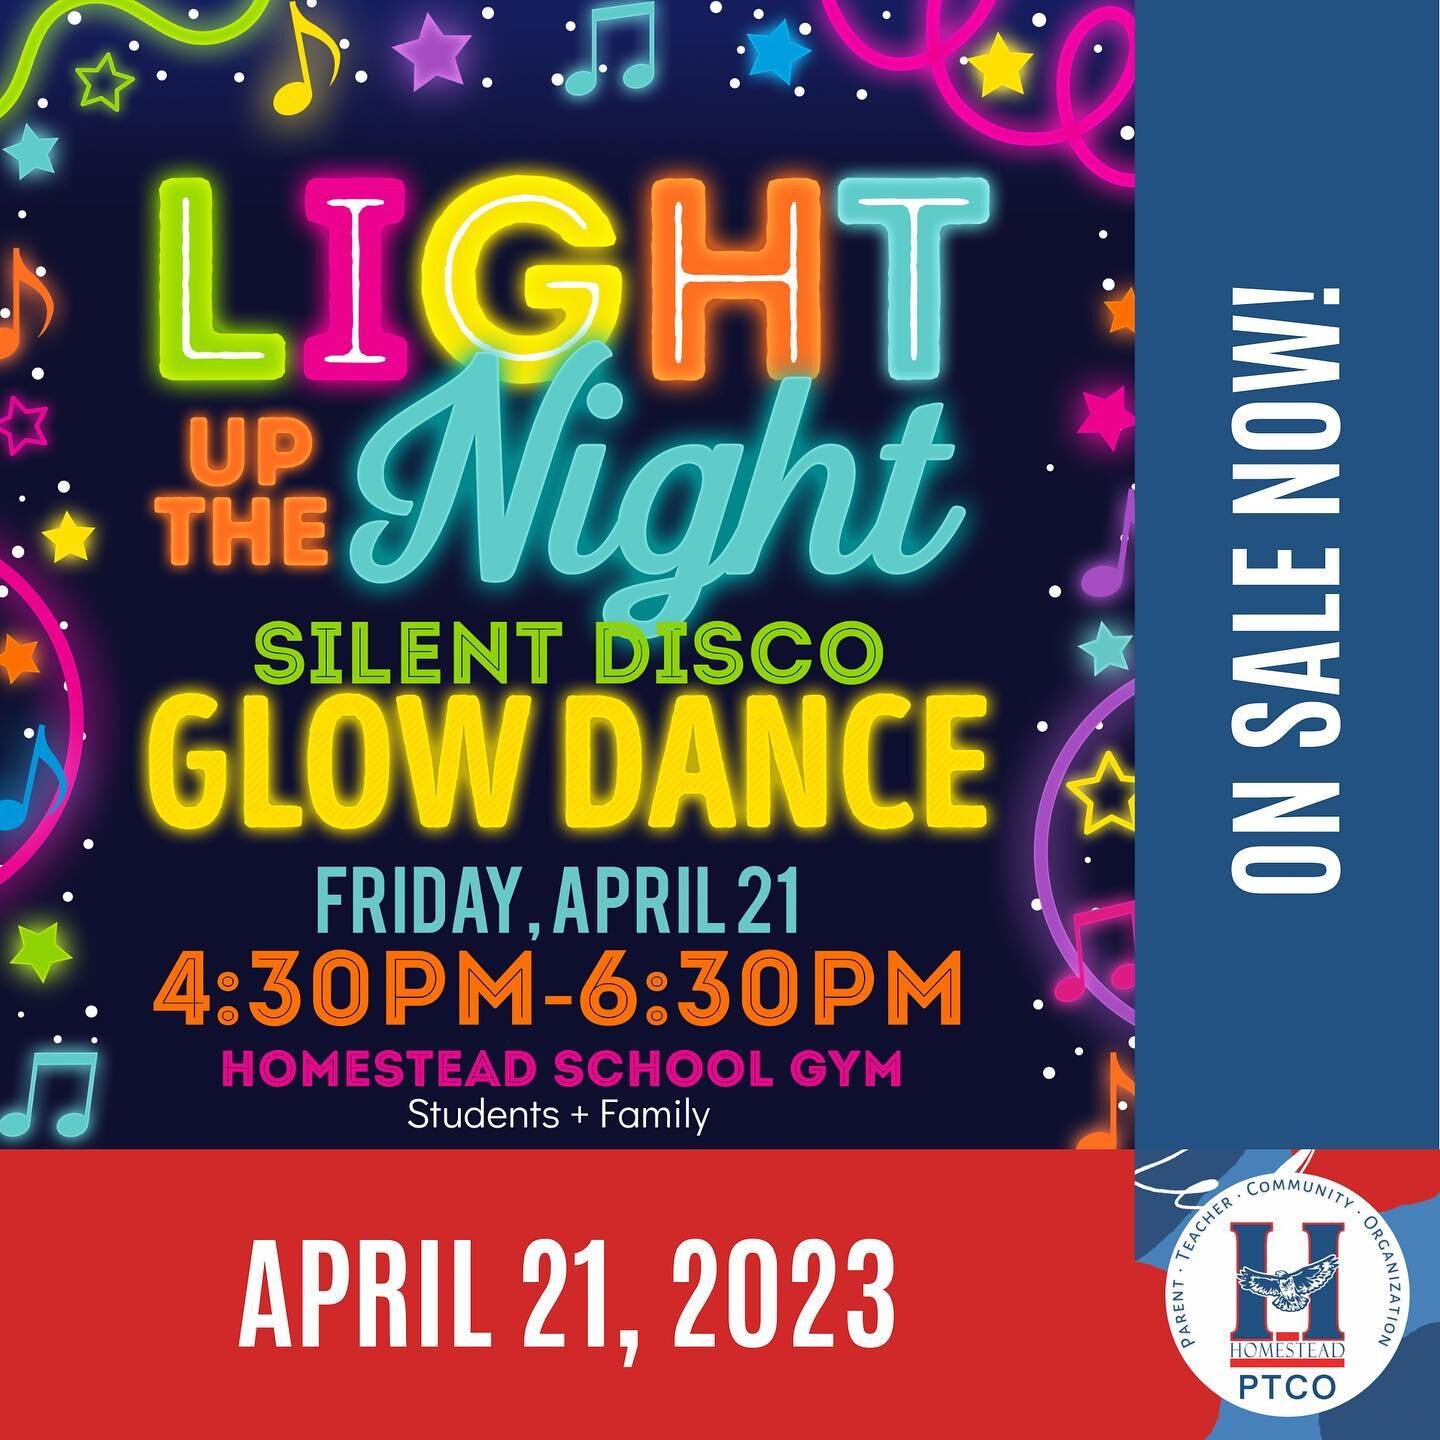 Please join us on Friday, April 21 for Homestead's first-ever Silent Disco Glow Night! 🪩 LINK IN BIO TO PURCHASE! 

Light Up The Night Silent Disco will take place in the Homestead Elementary School gym from 4:30-6:30pm on Friday, April 21. Wear you